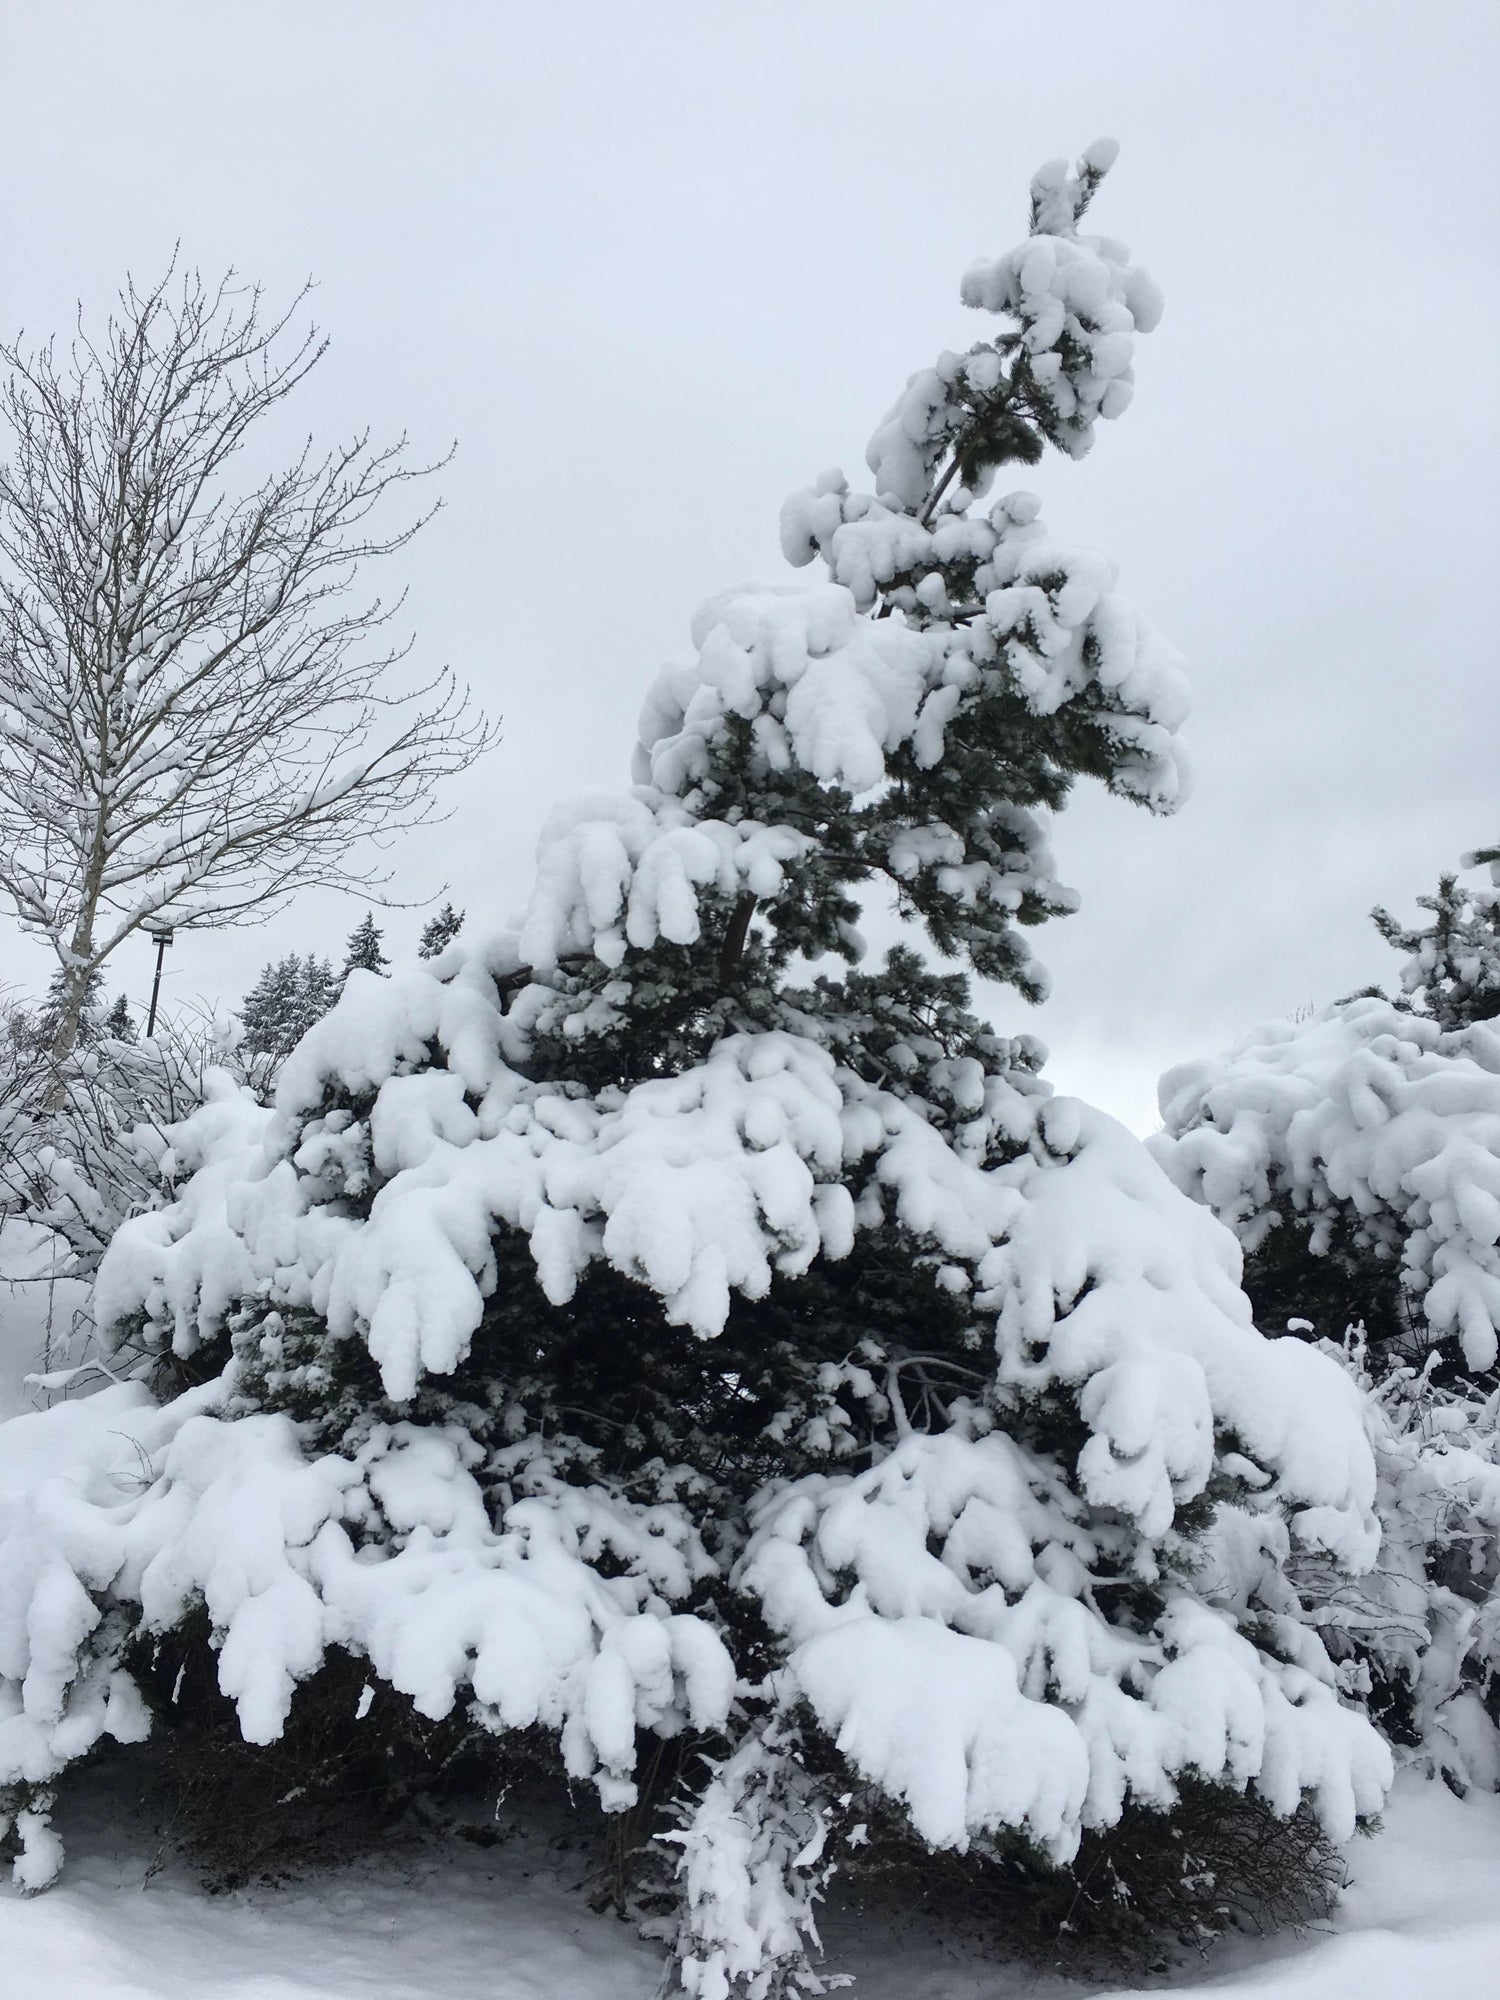 An evergreen weighed down by snow.